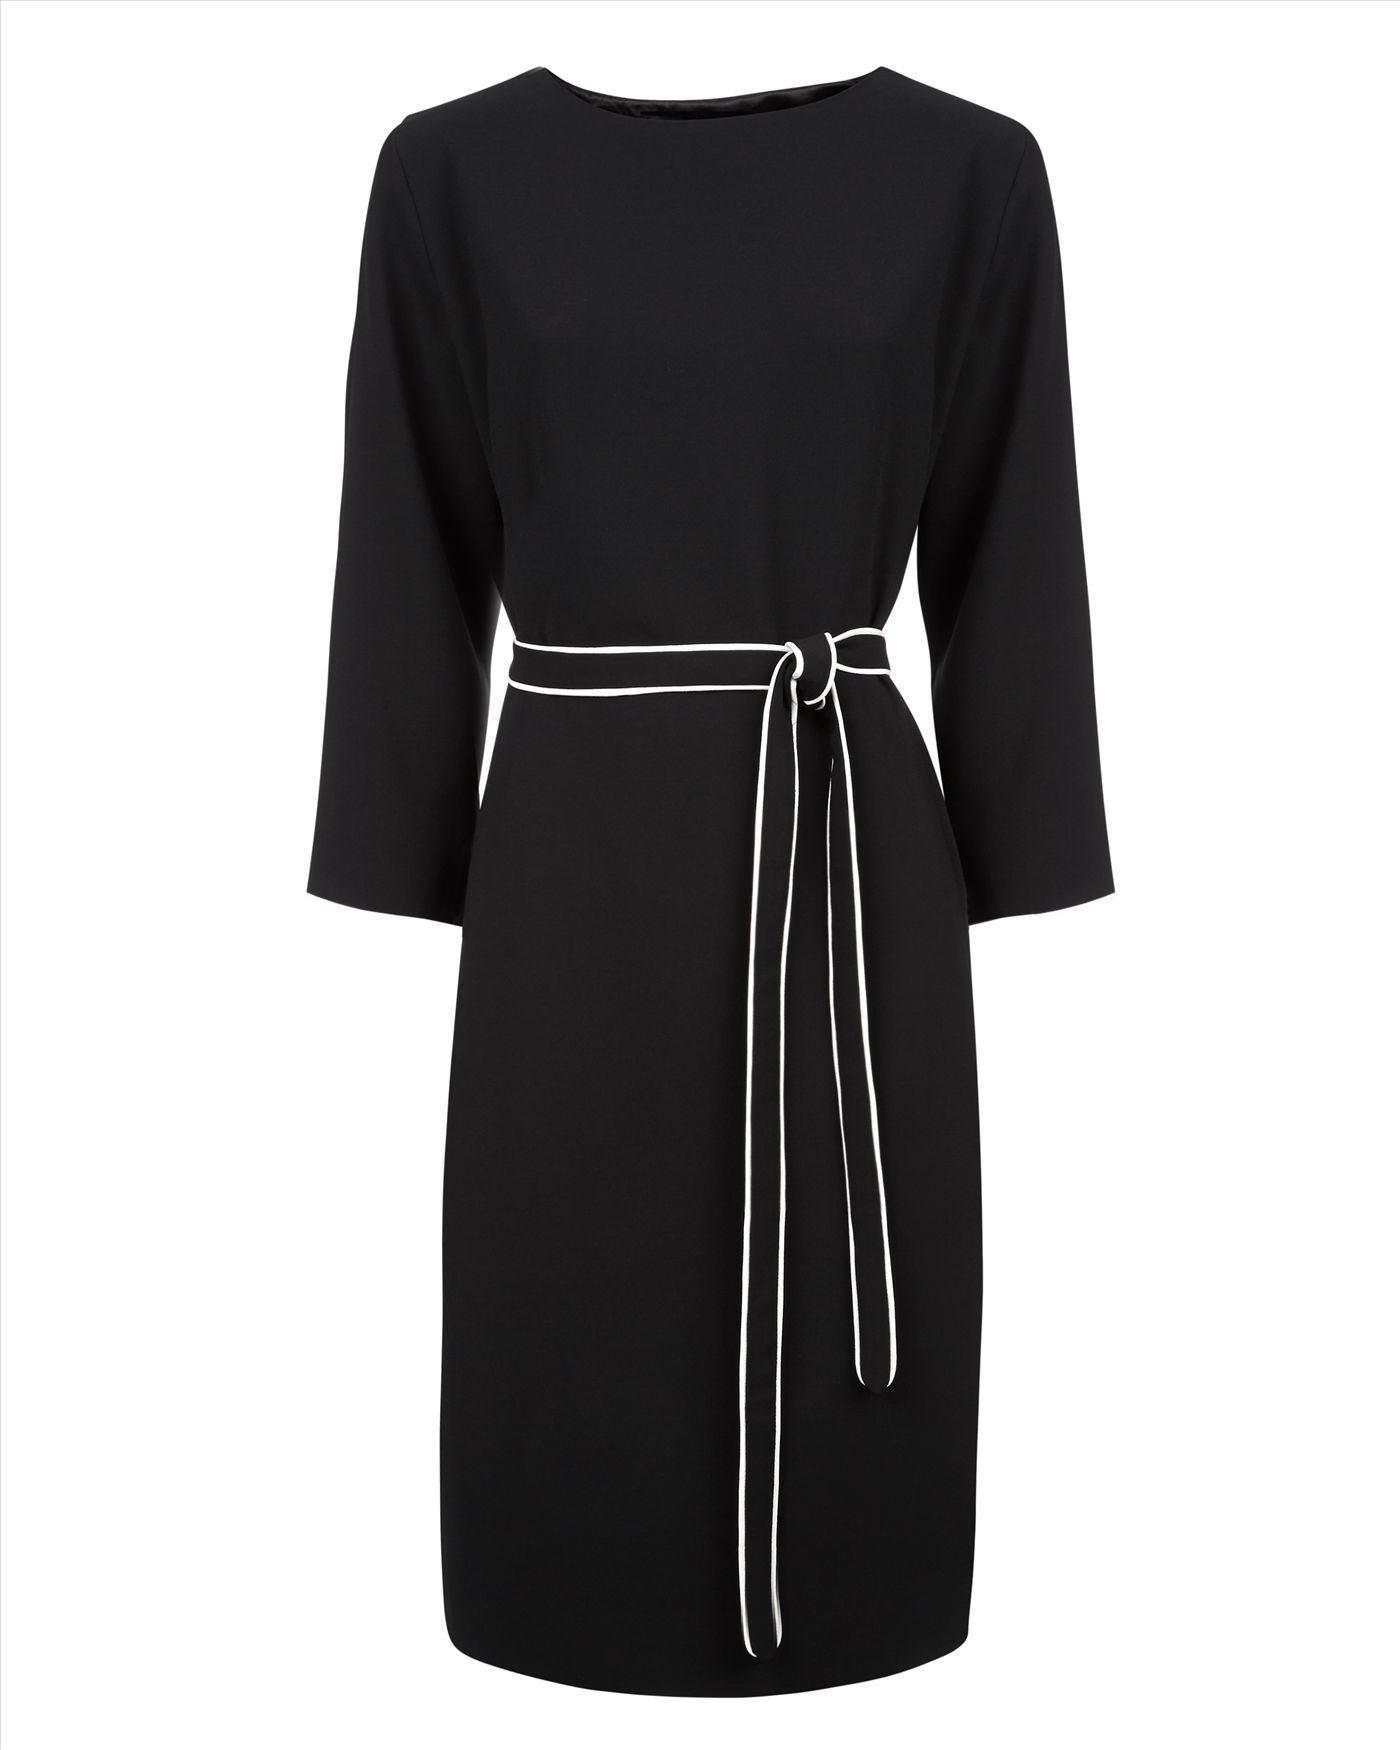 Lyst - Jaeger Contrast Piping Dress in Black